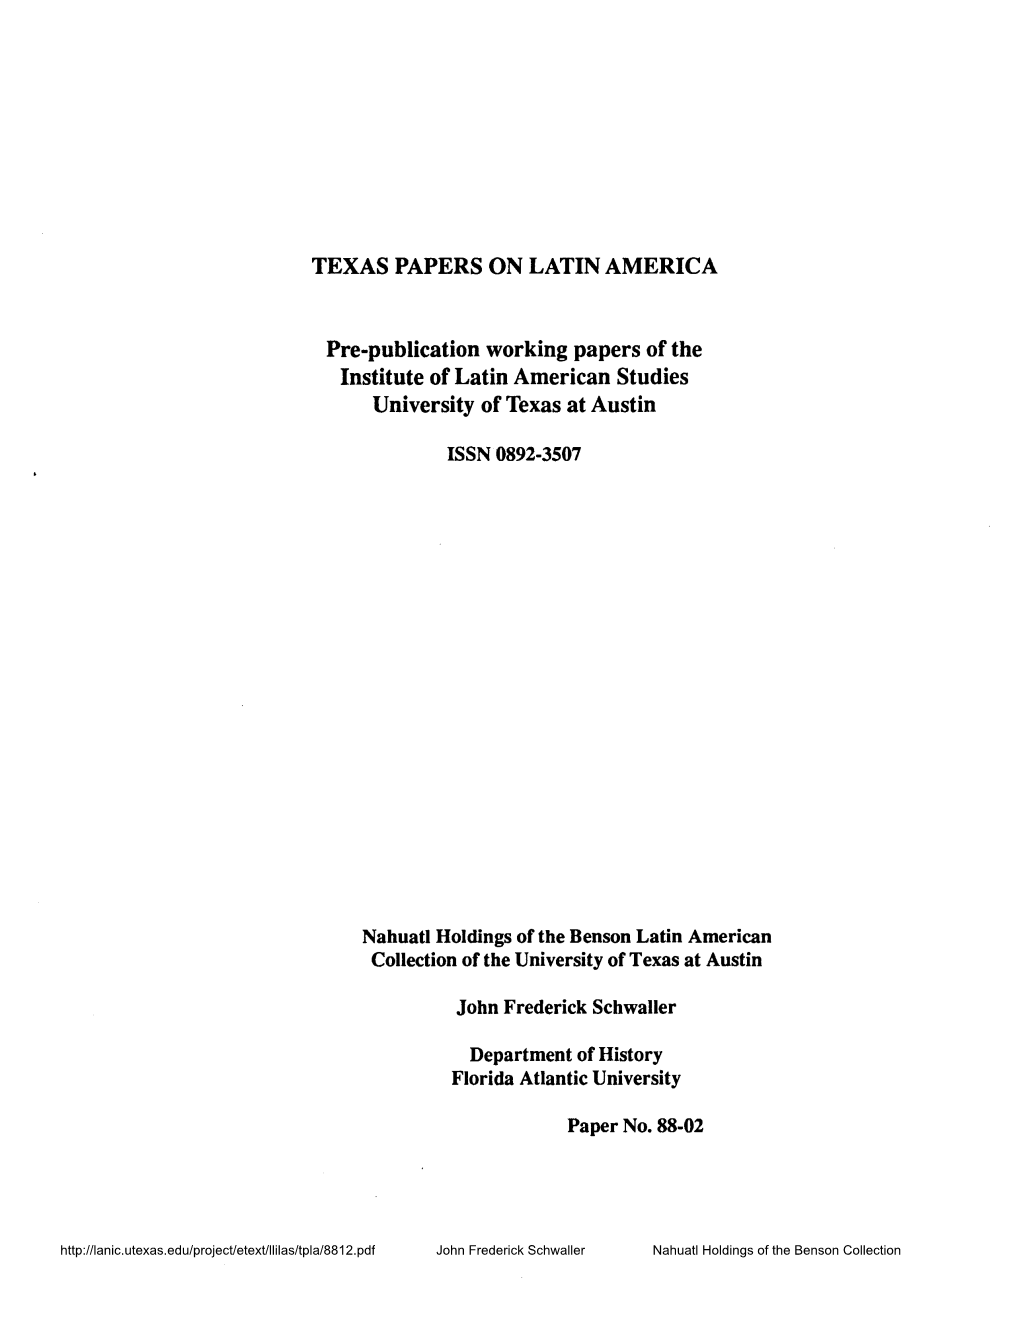 TEXAS PAPERS on LATIN AMERICA Pre-Publication Working Papers